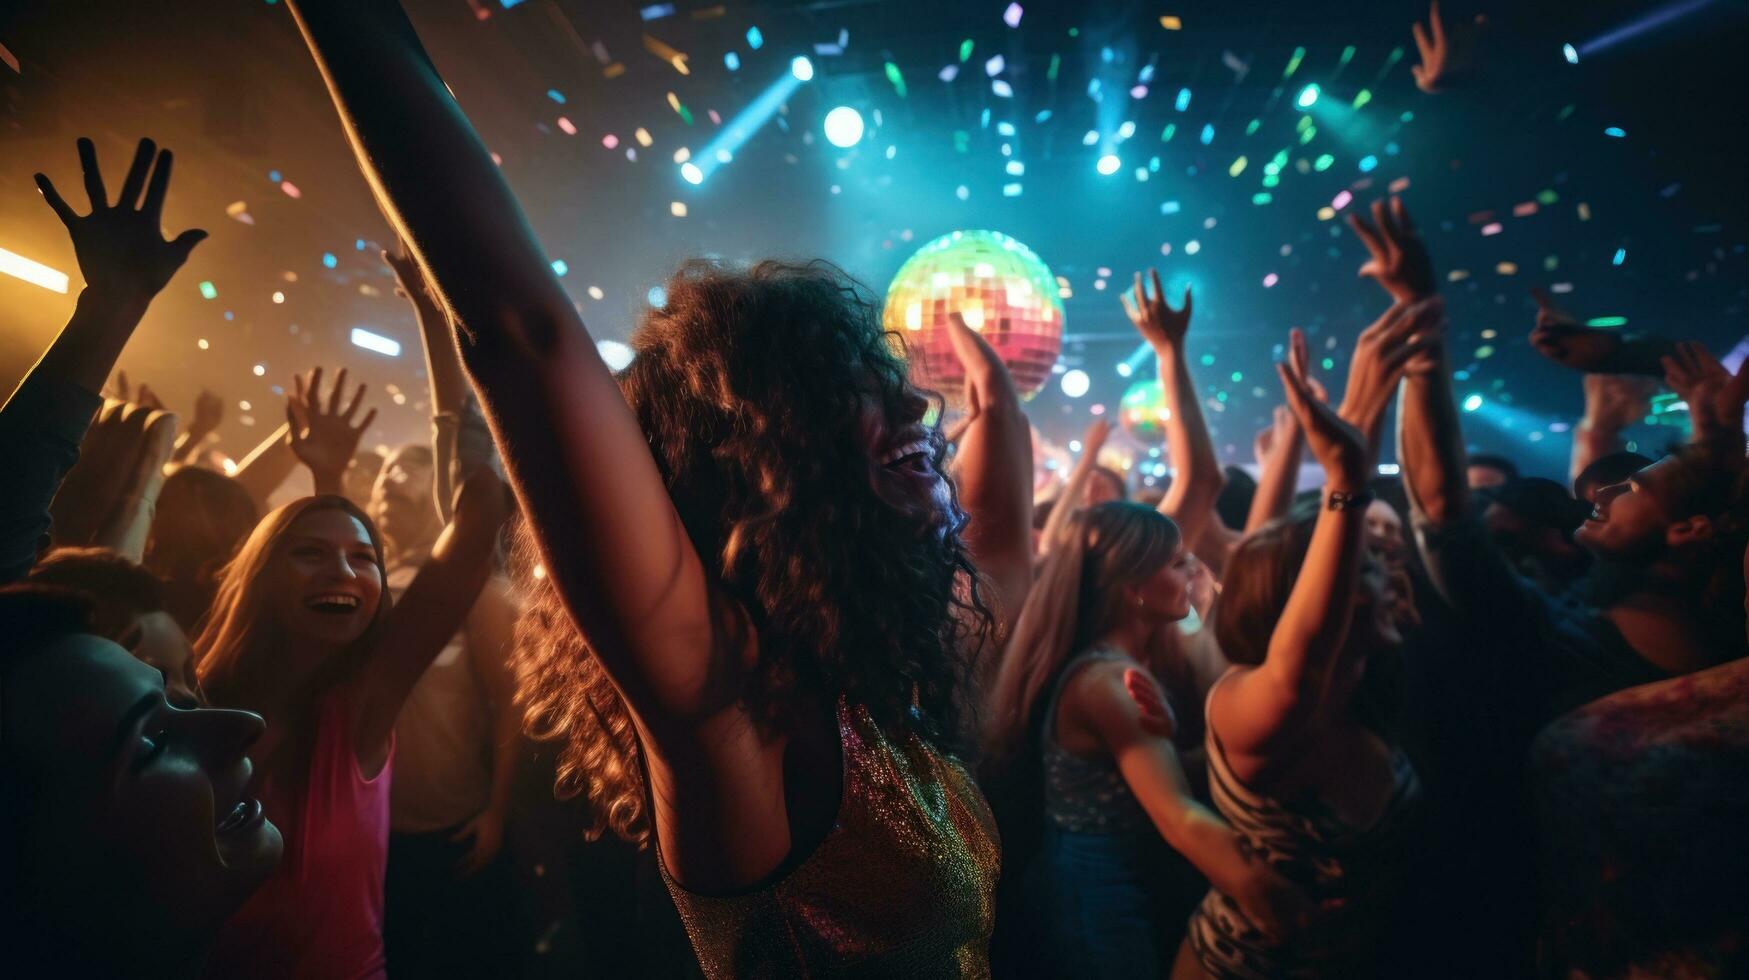 AI generated A group of friends dancing together under colorful lights and a disco ball in a crowded nightclub photo